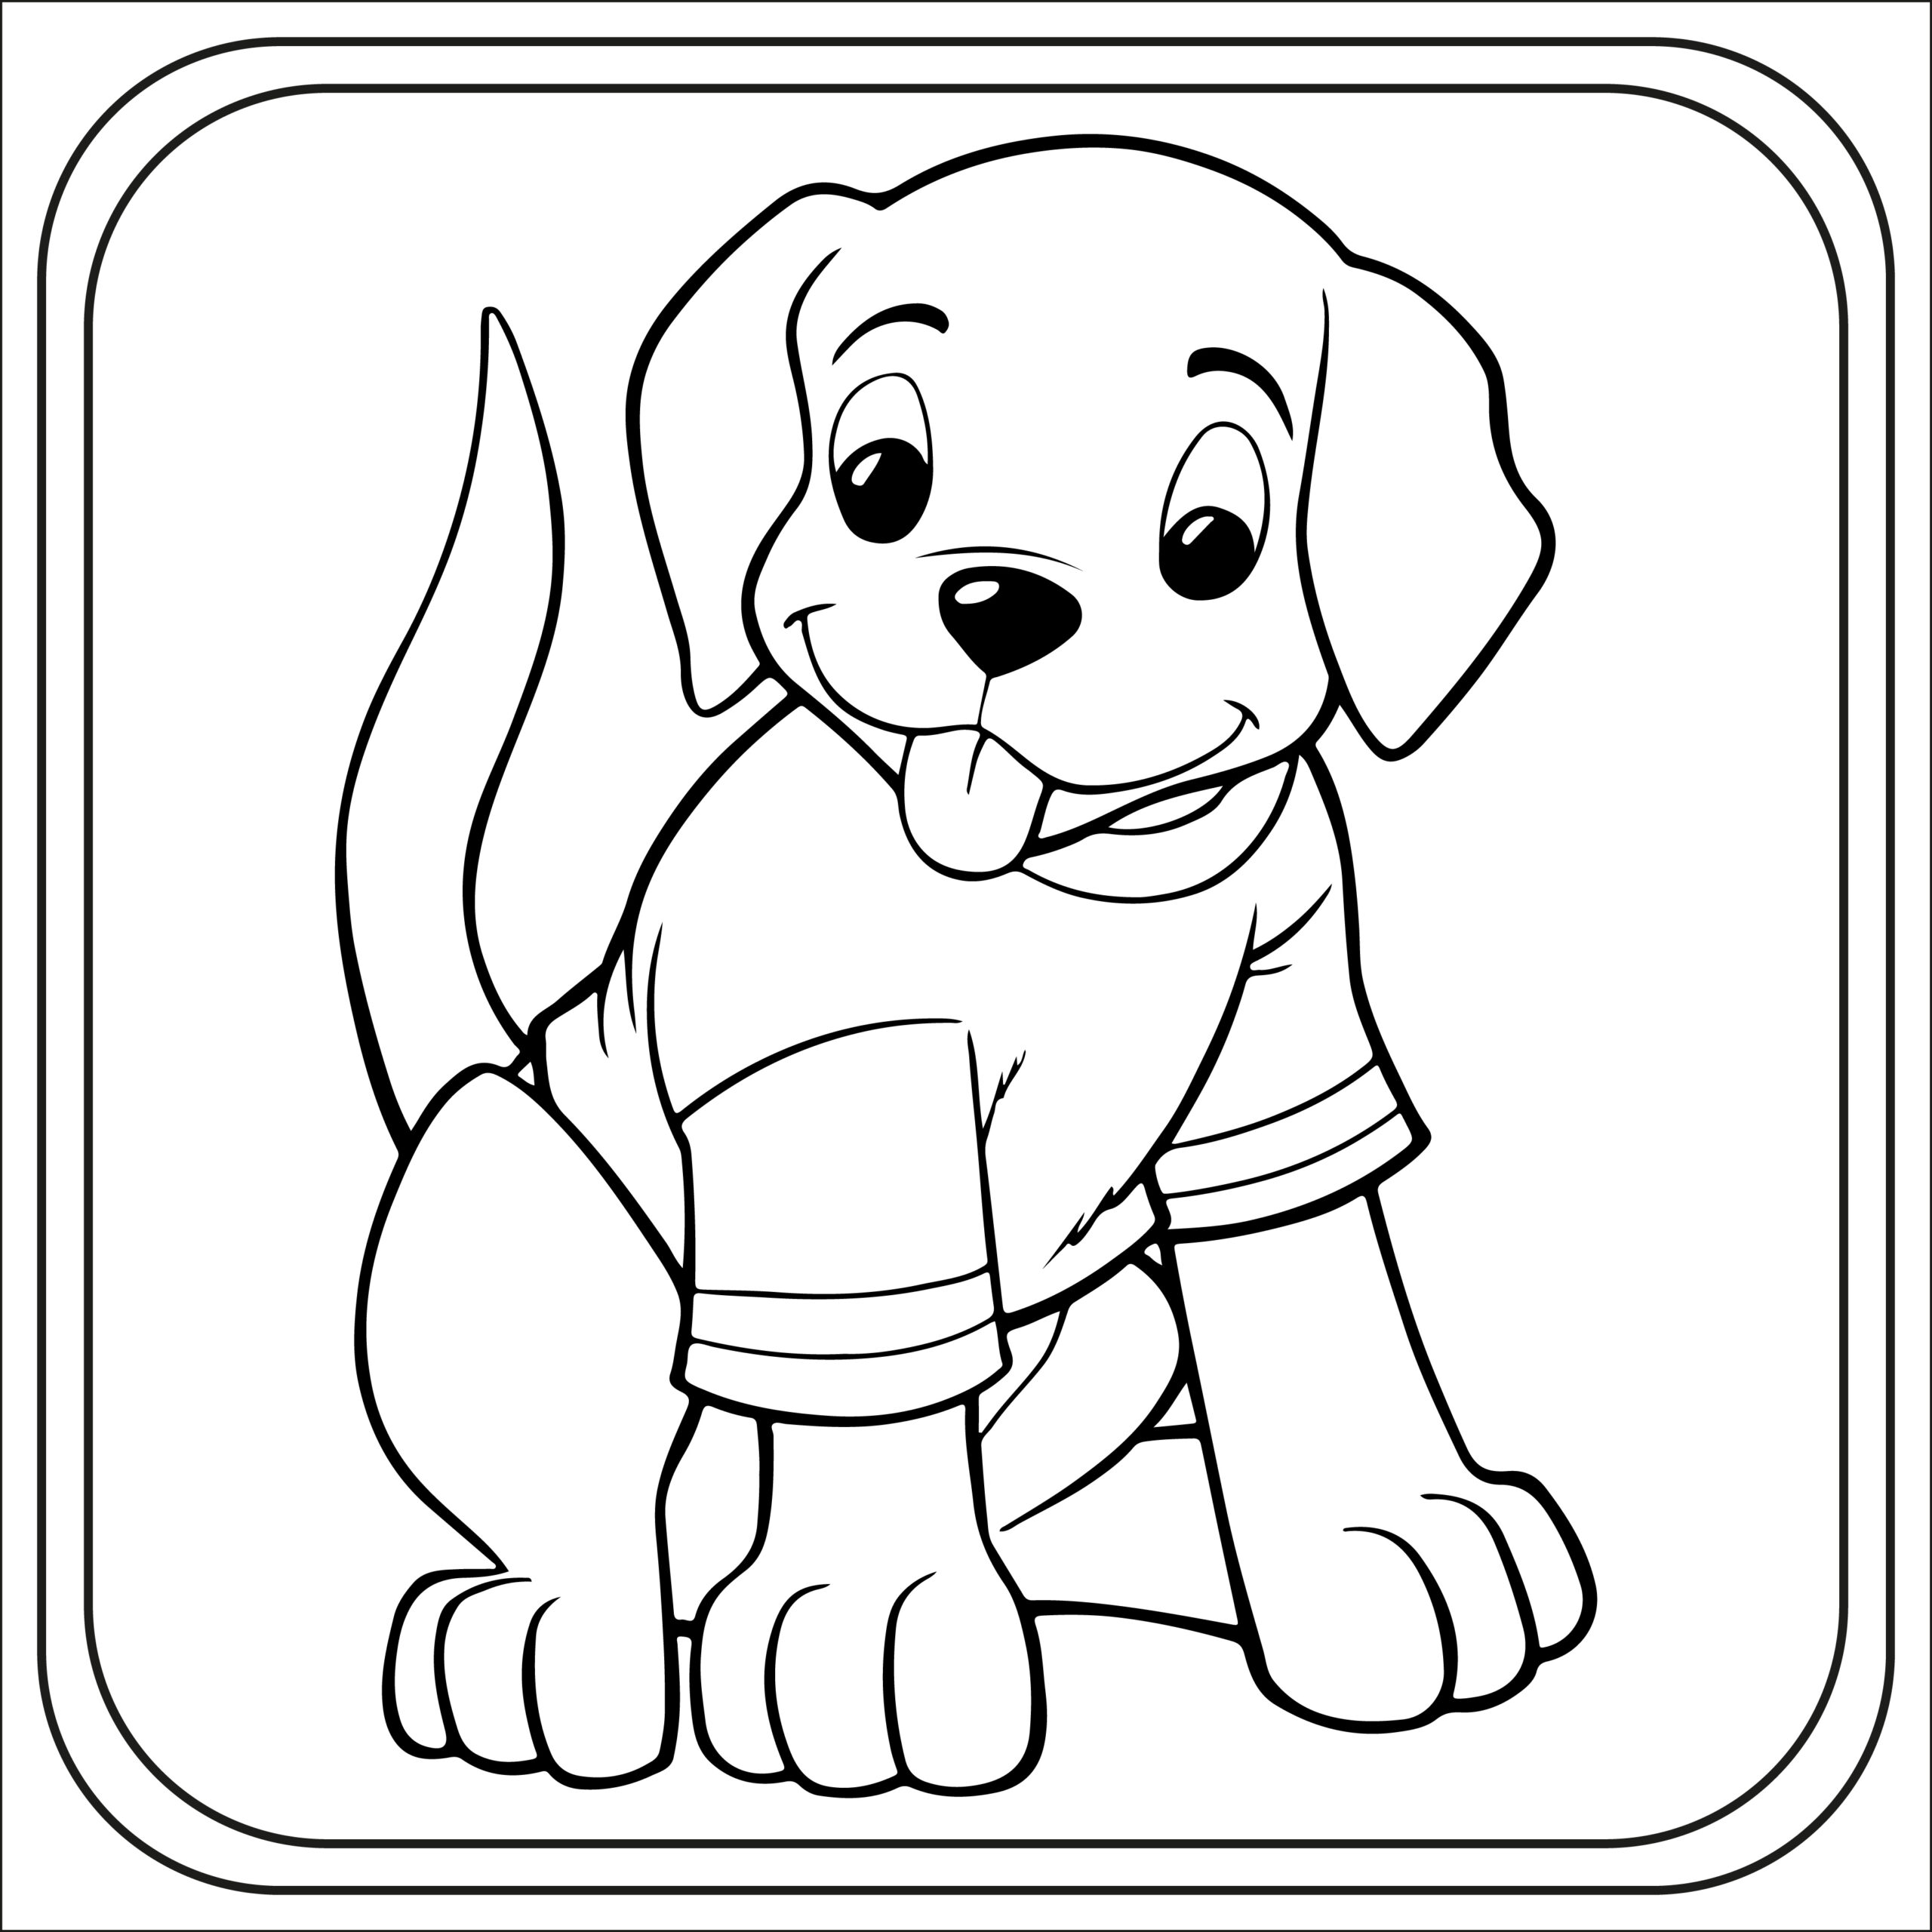 Dog coloring pages preschool kindergarten first grade made by teachers